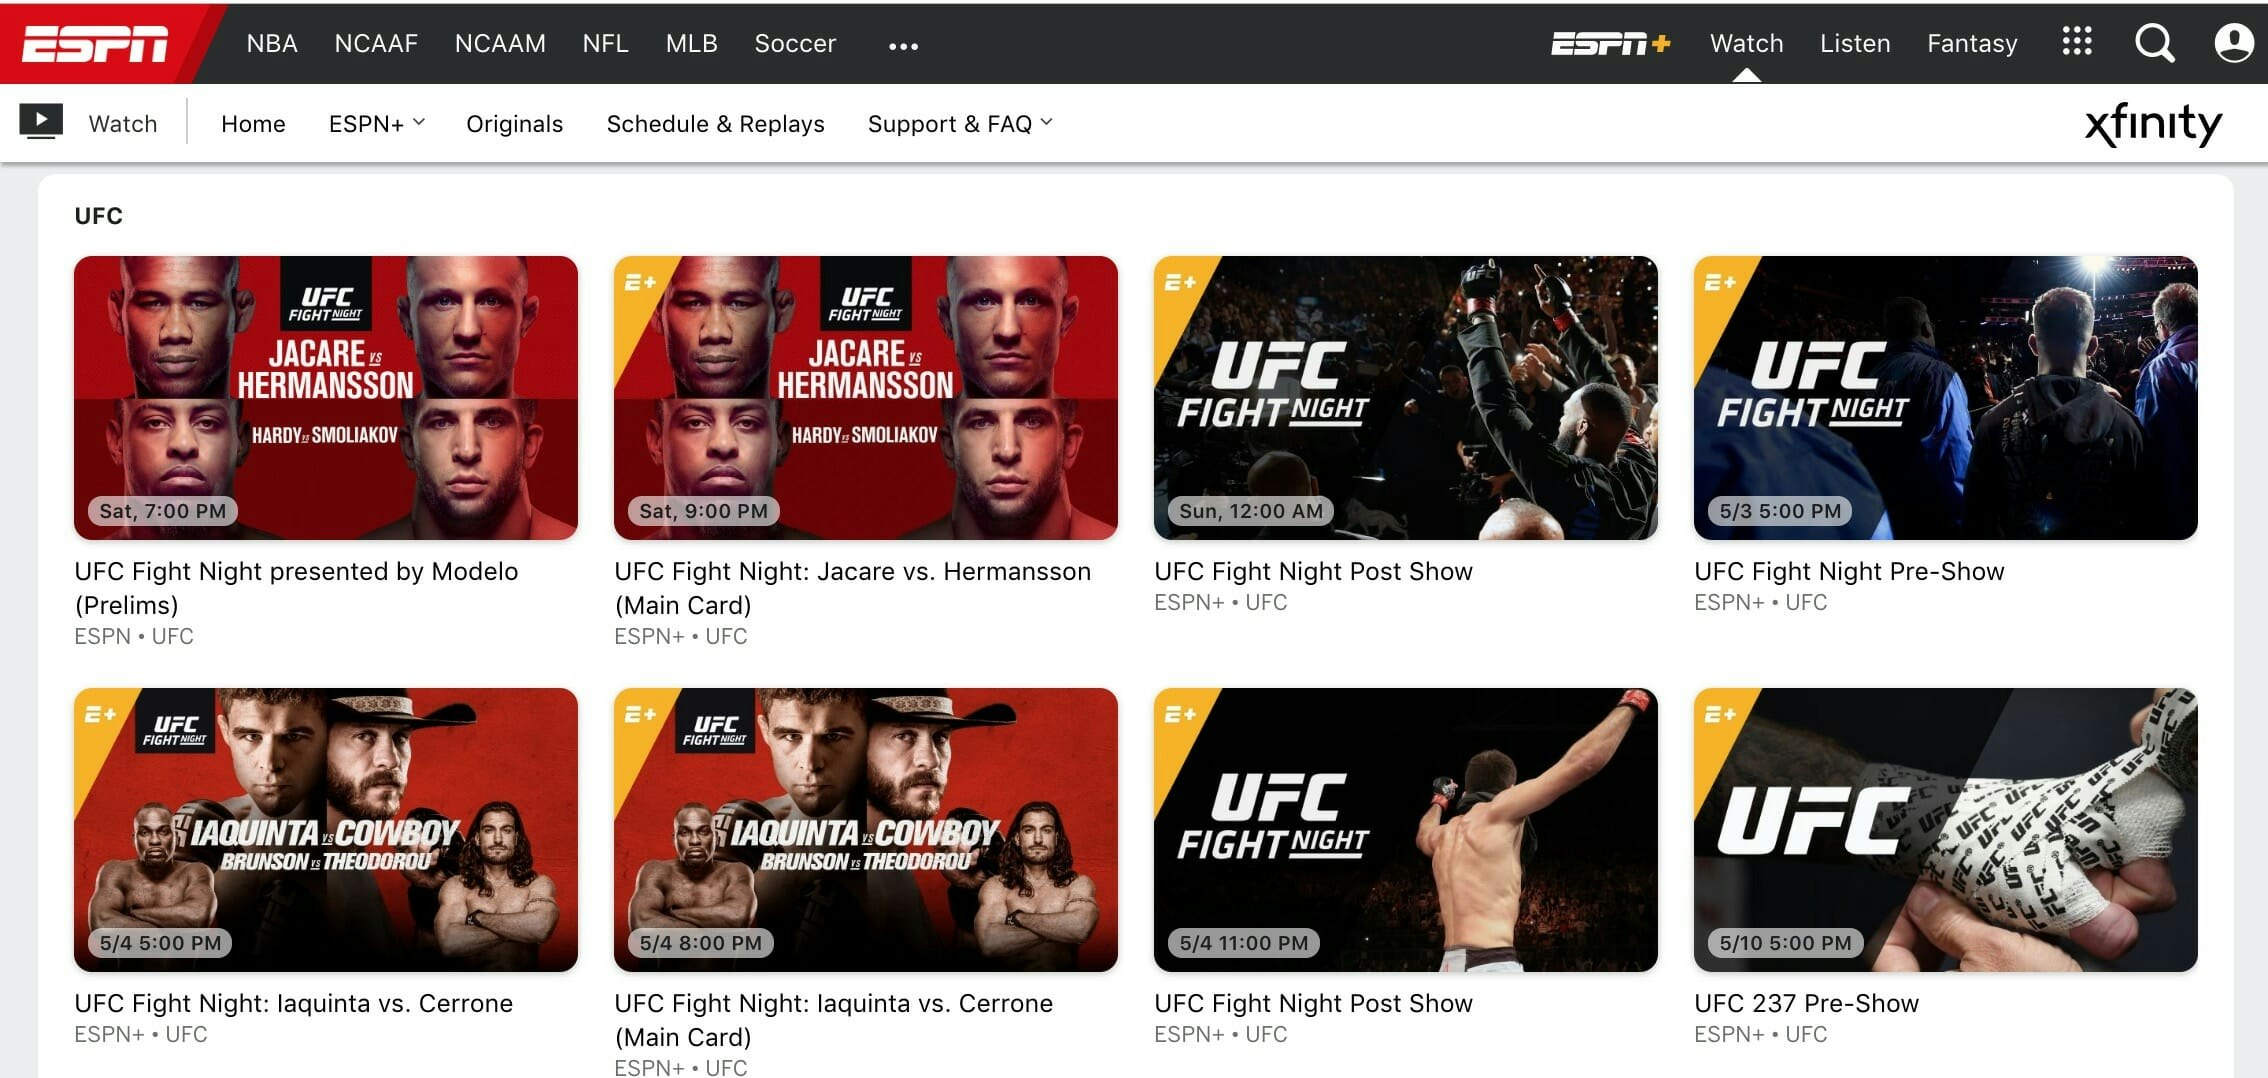 How to Watch UFC on ESPN+ for Free UFC Fight Night and More